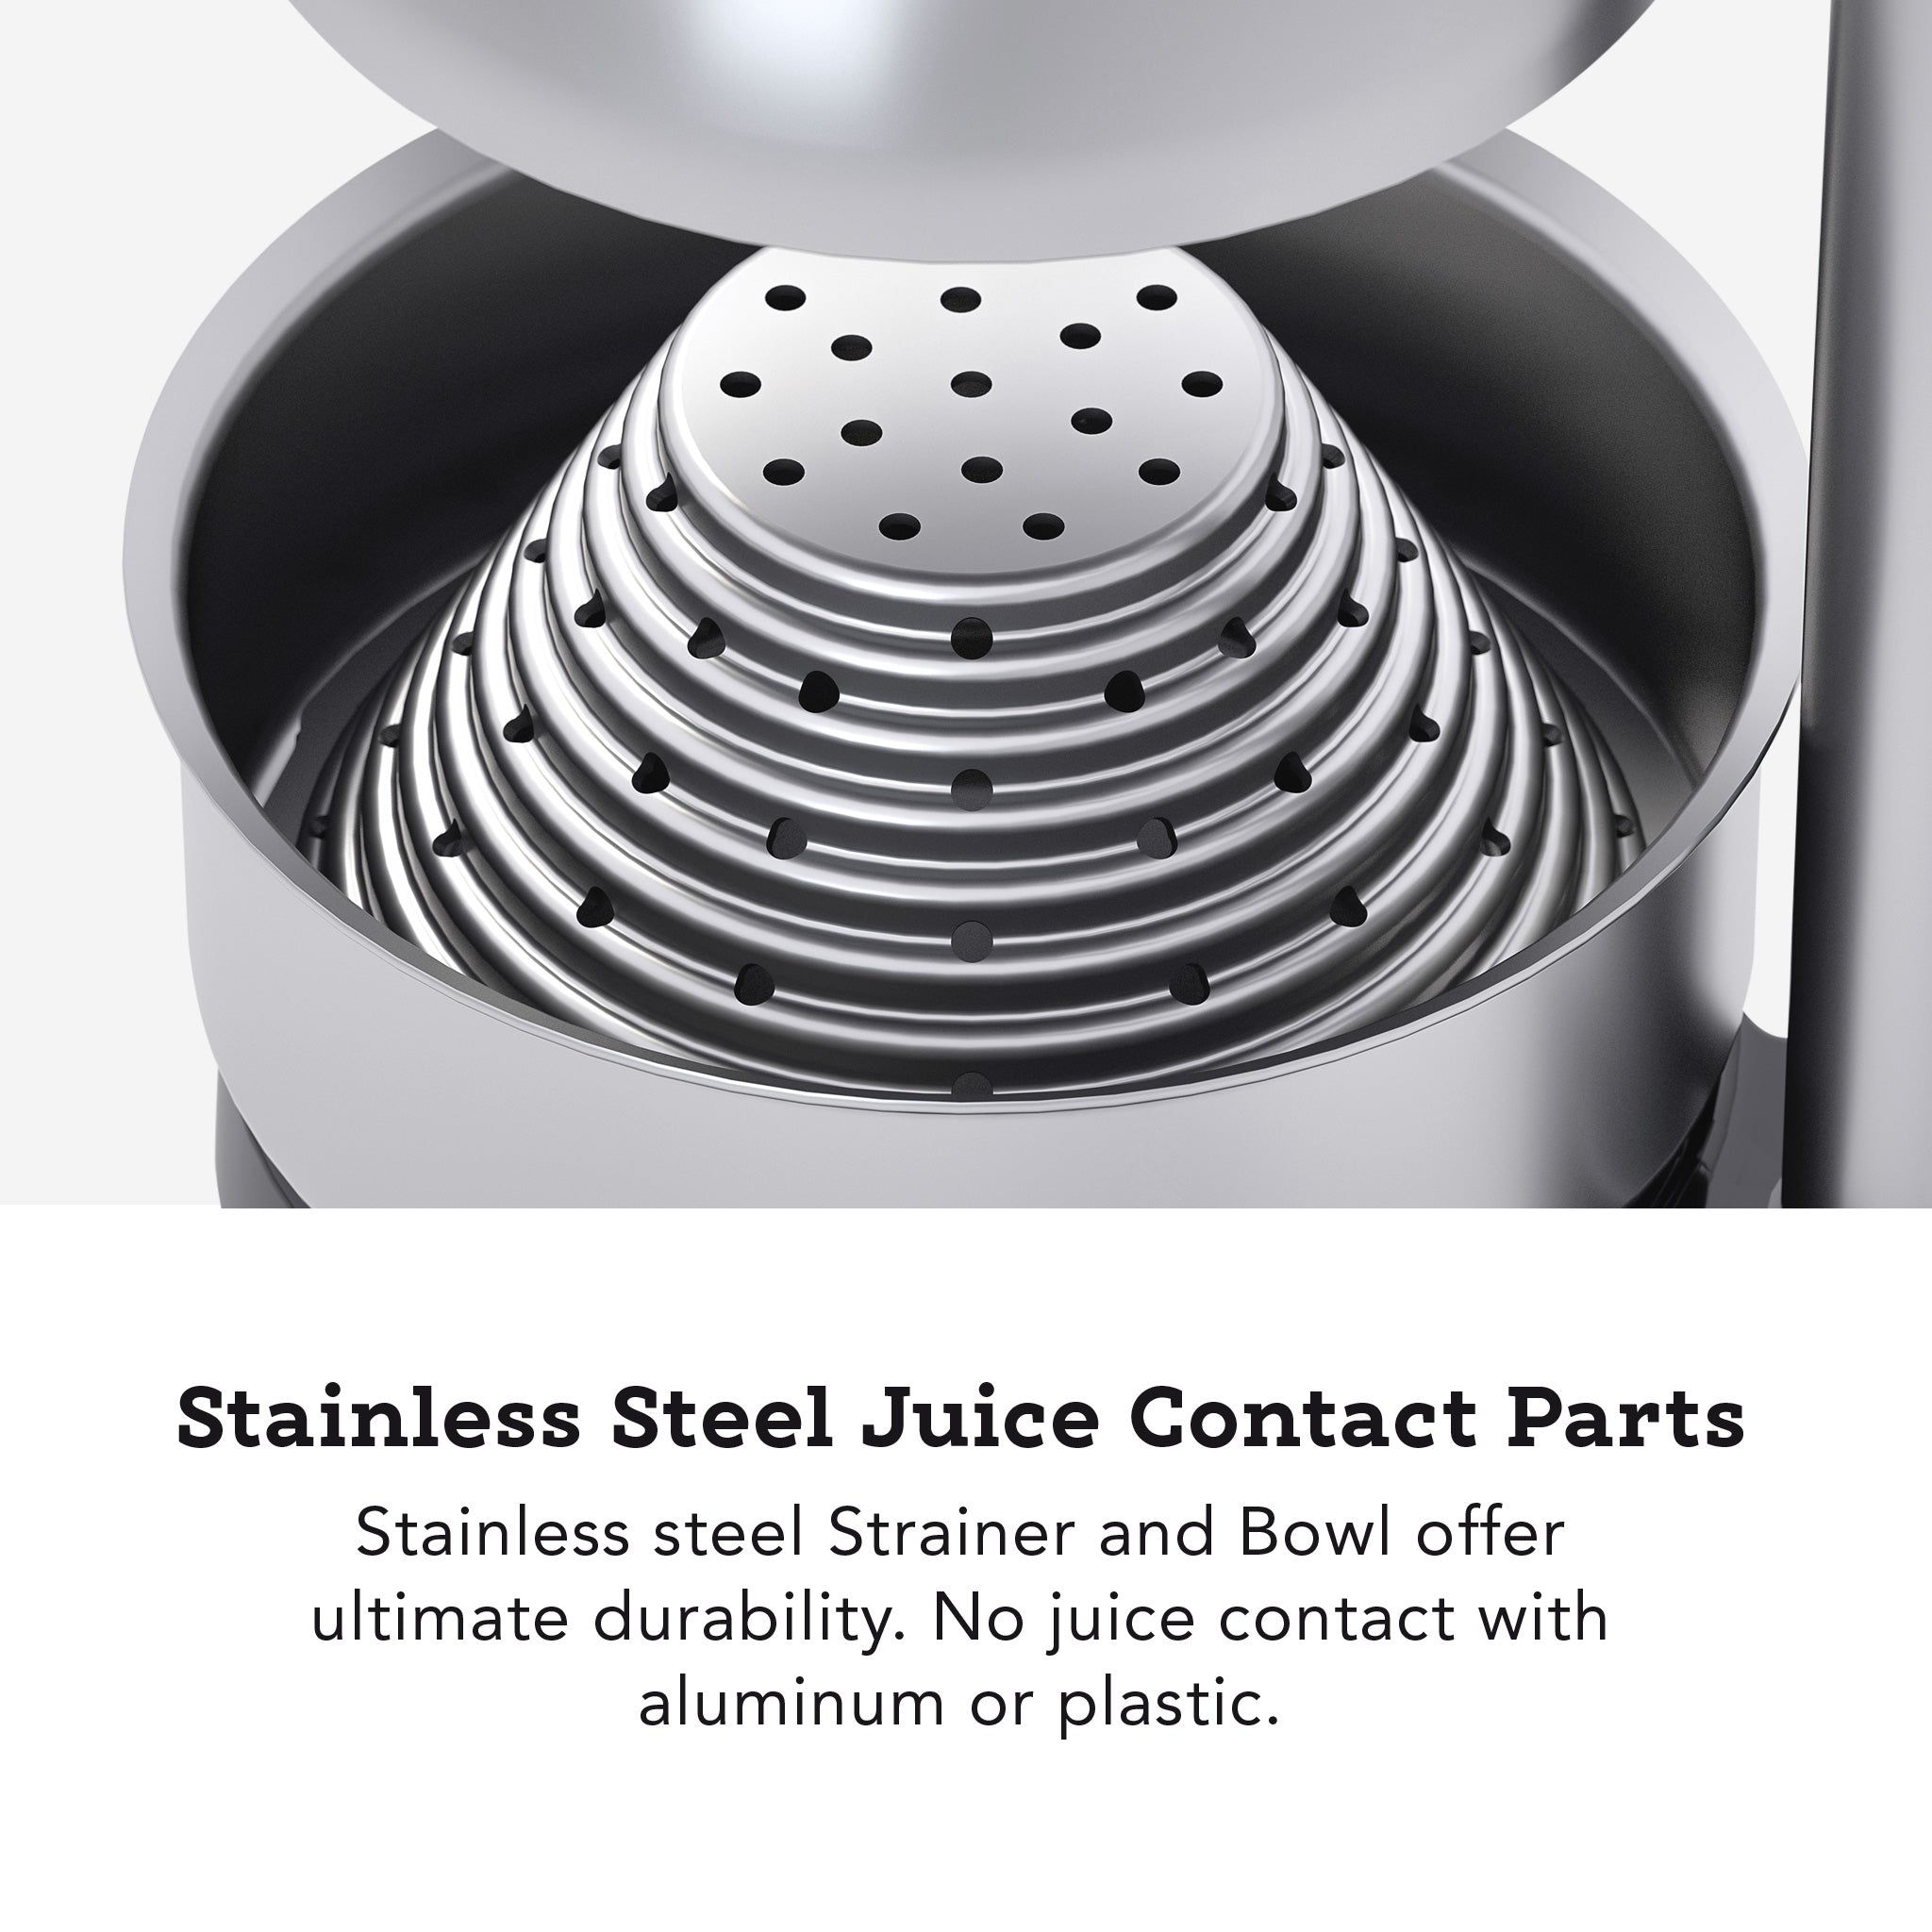 Tribest Professional Cancan Manual Pomegranate Juice Press MJP-105 in Black. Stainless Steel Juice Contact Parts